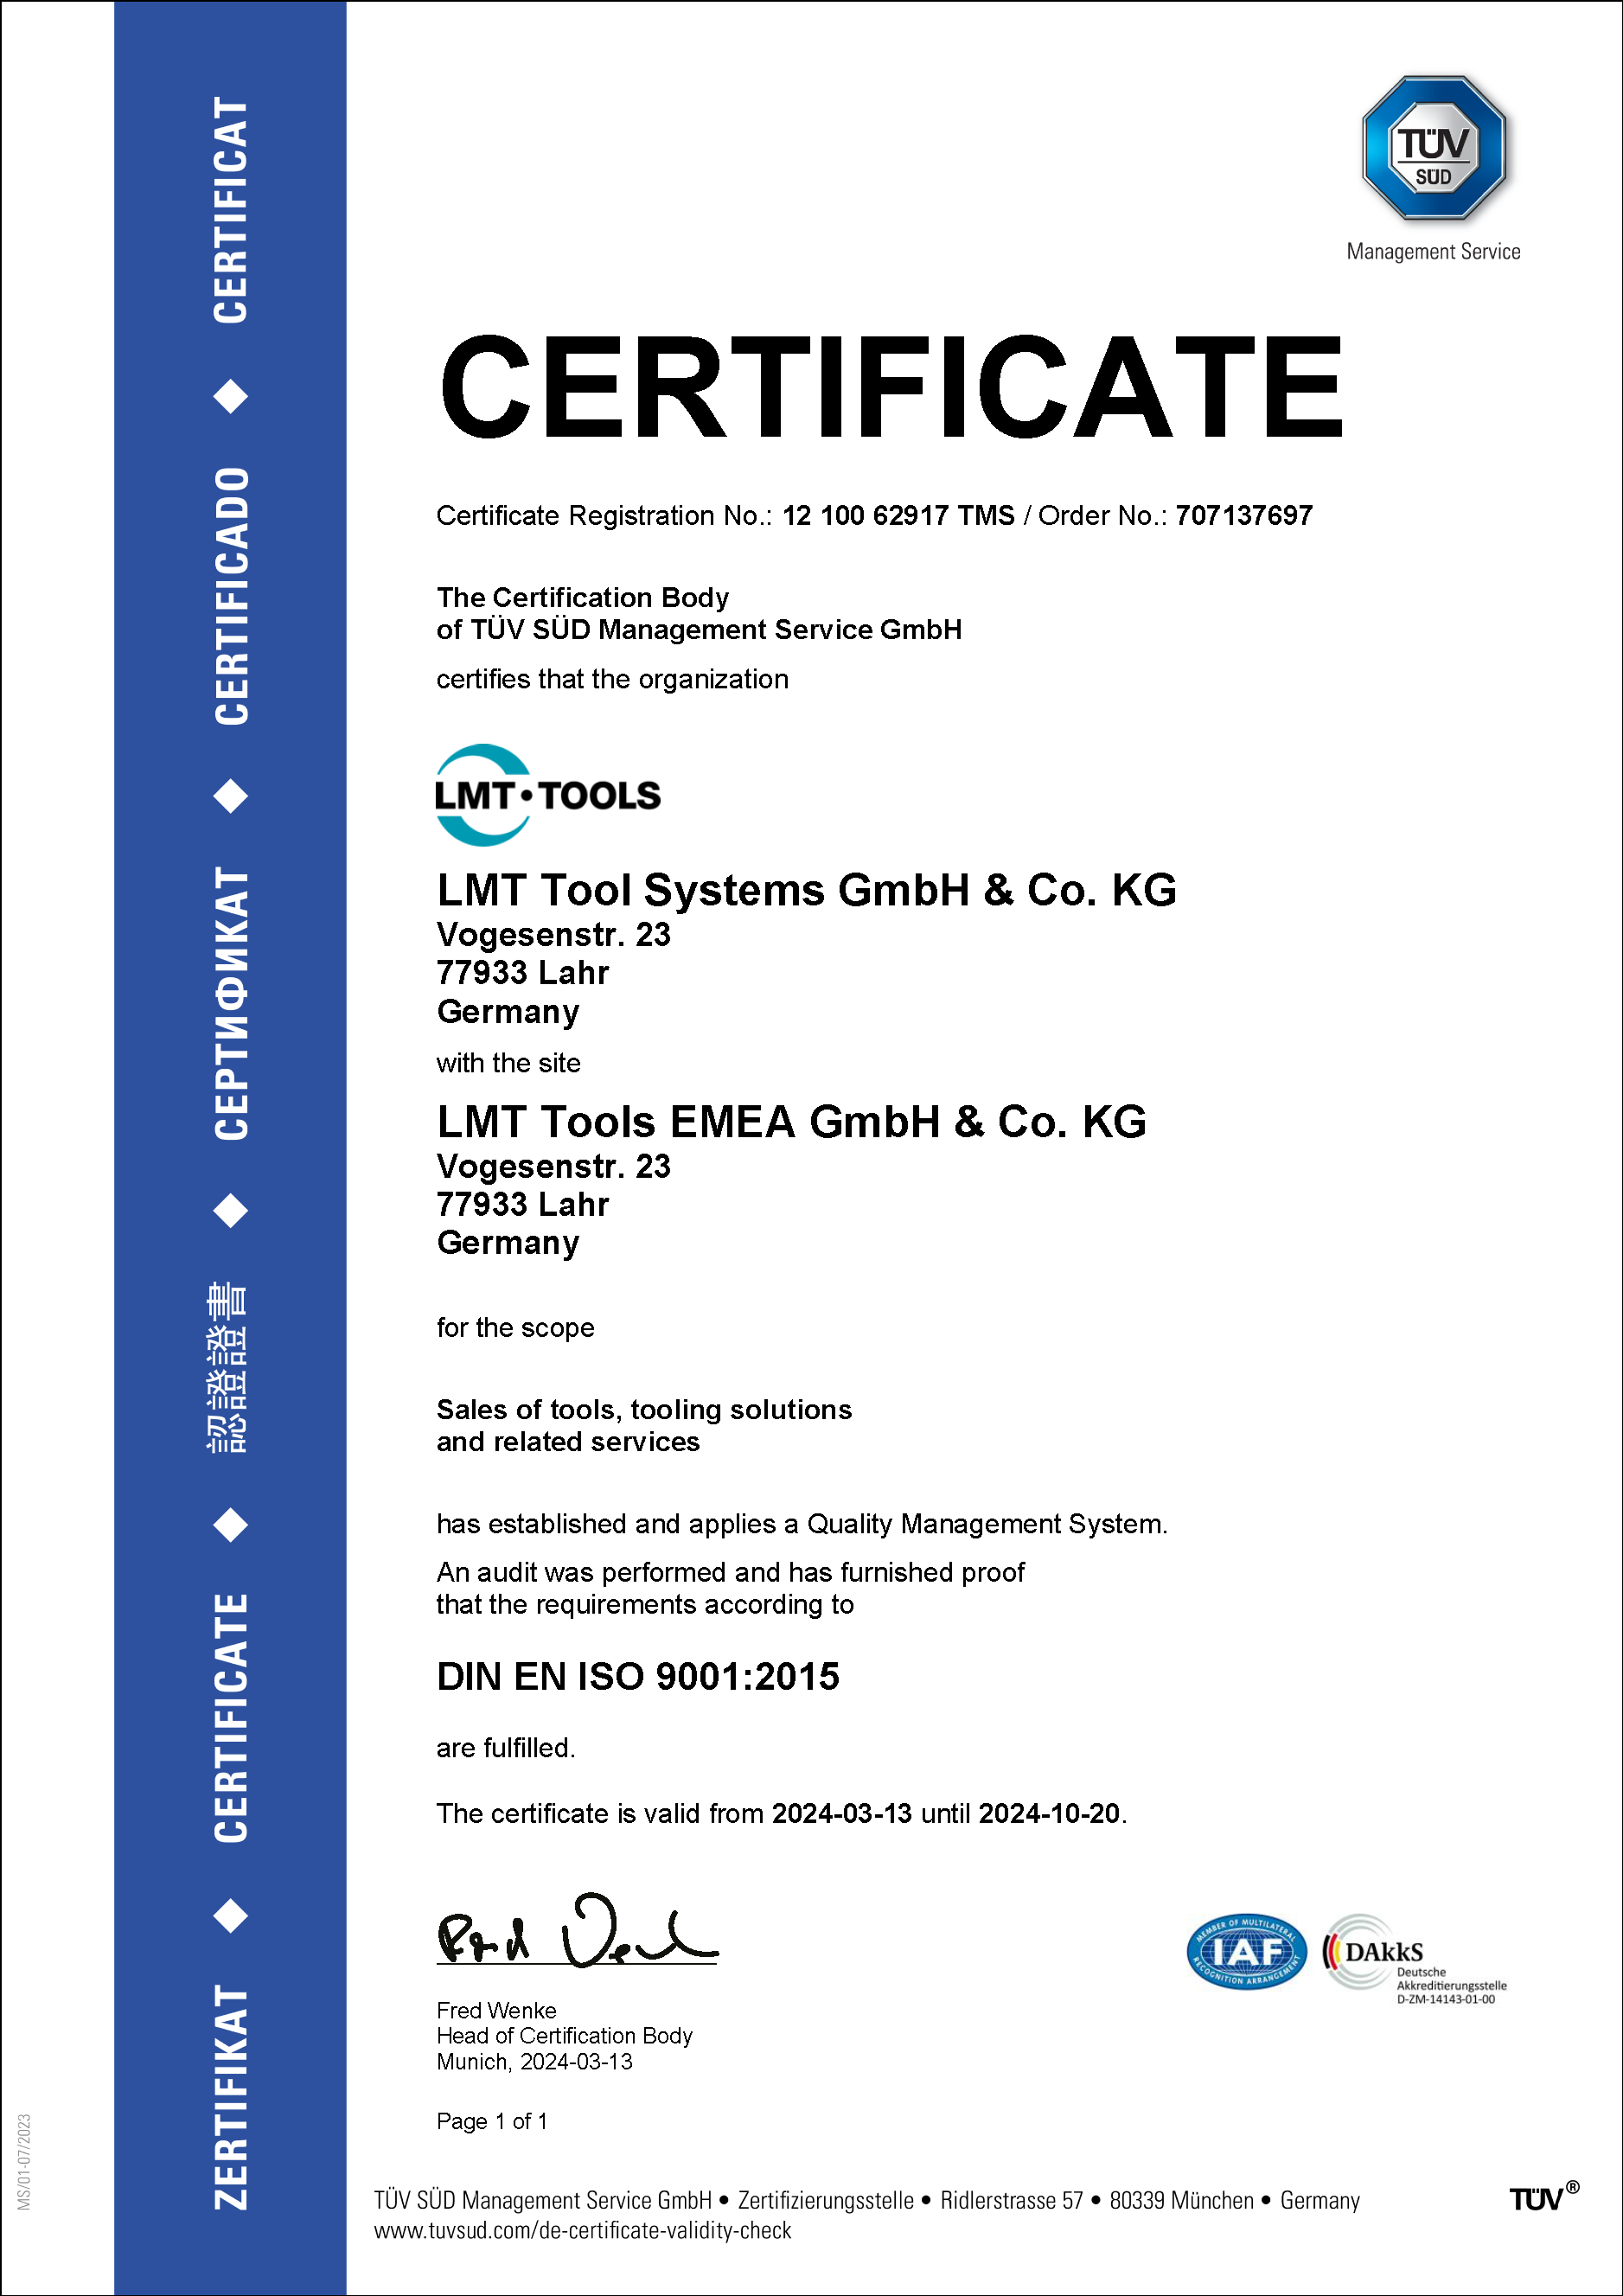 Quality Management System - LMT Tool Systems & LMT Tools EMEA